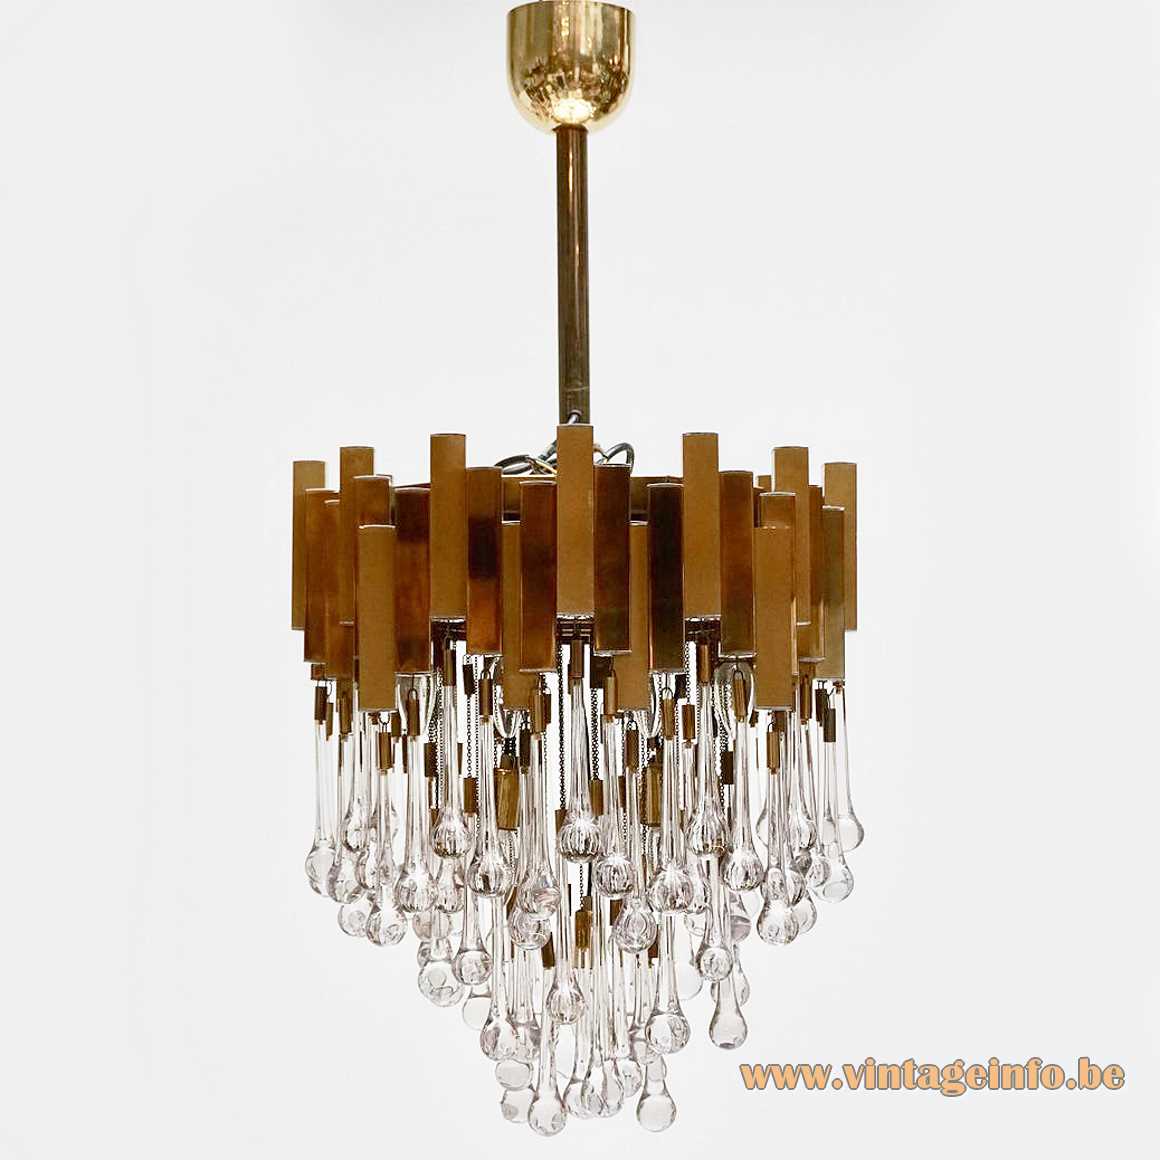 BD Lumica brass teardrop chandelier square metal tubes clear crystal glass drops 1970s Sciolari Willy Rizzo 